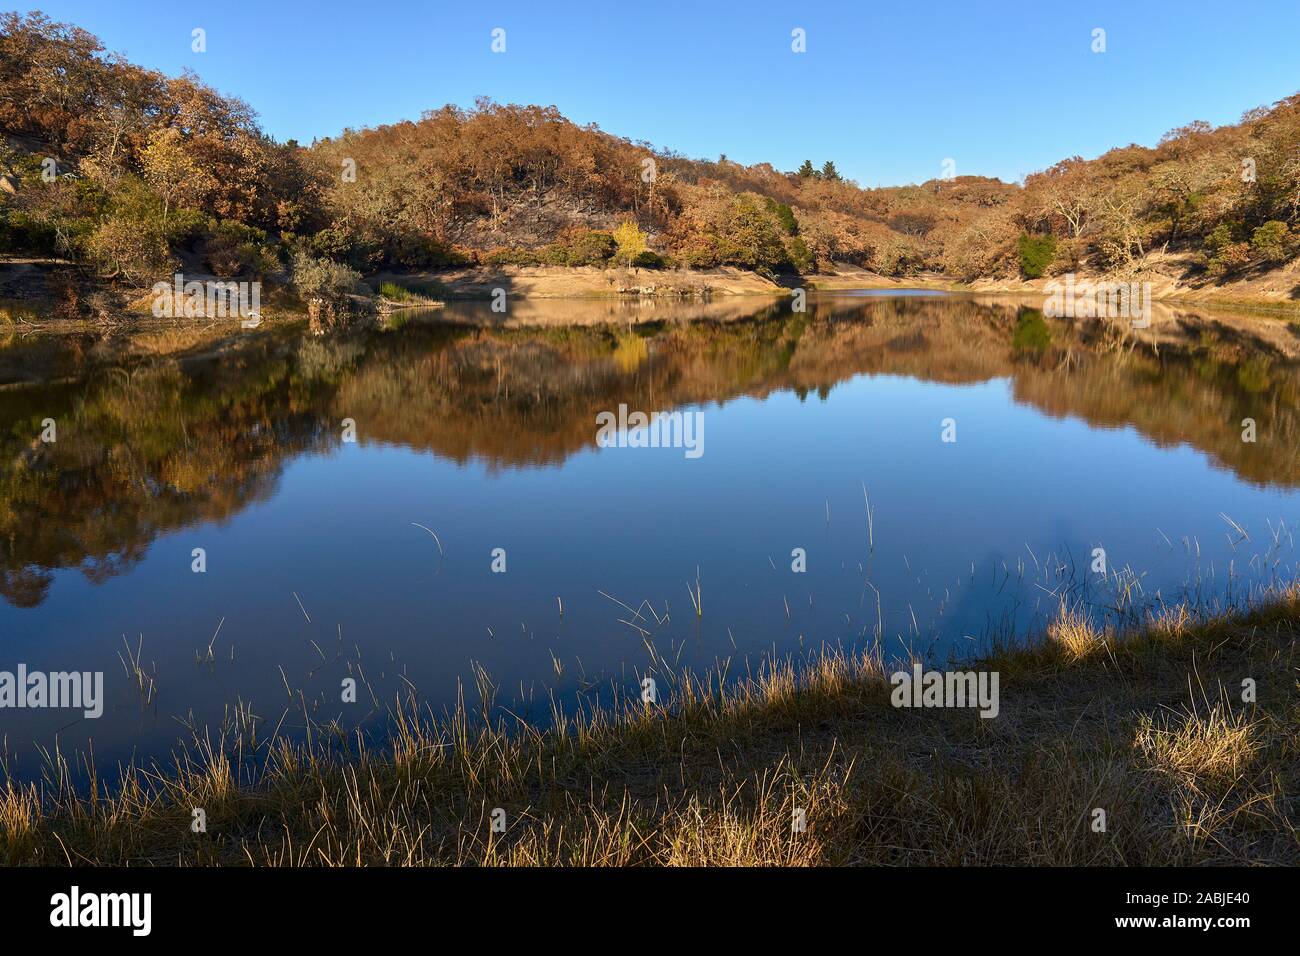 Tranquil pond reflection, burned forest, autumn colors, sunny day, nature and outdoors. Foothill Regional Park in Windsor, Sonoma County, California. Stock Photo